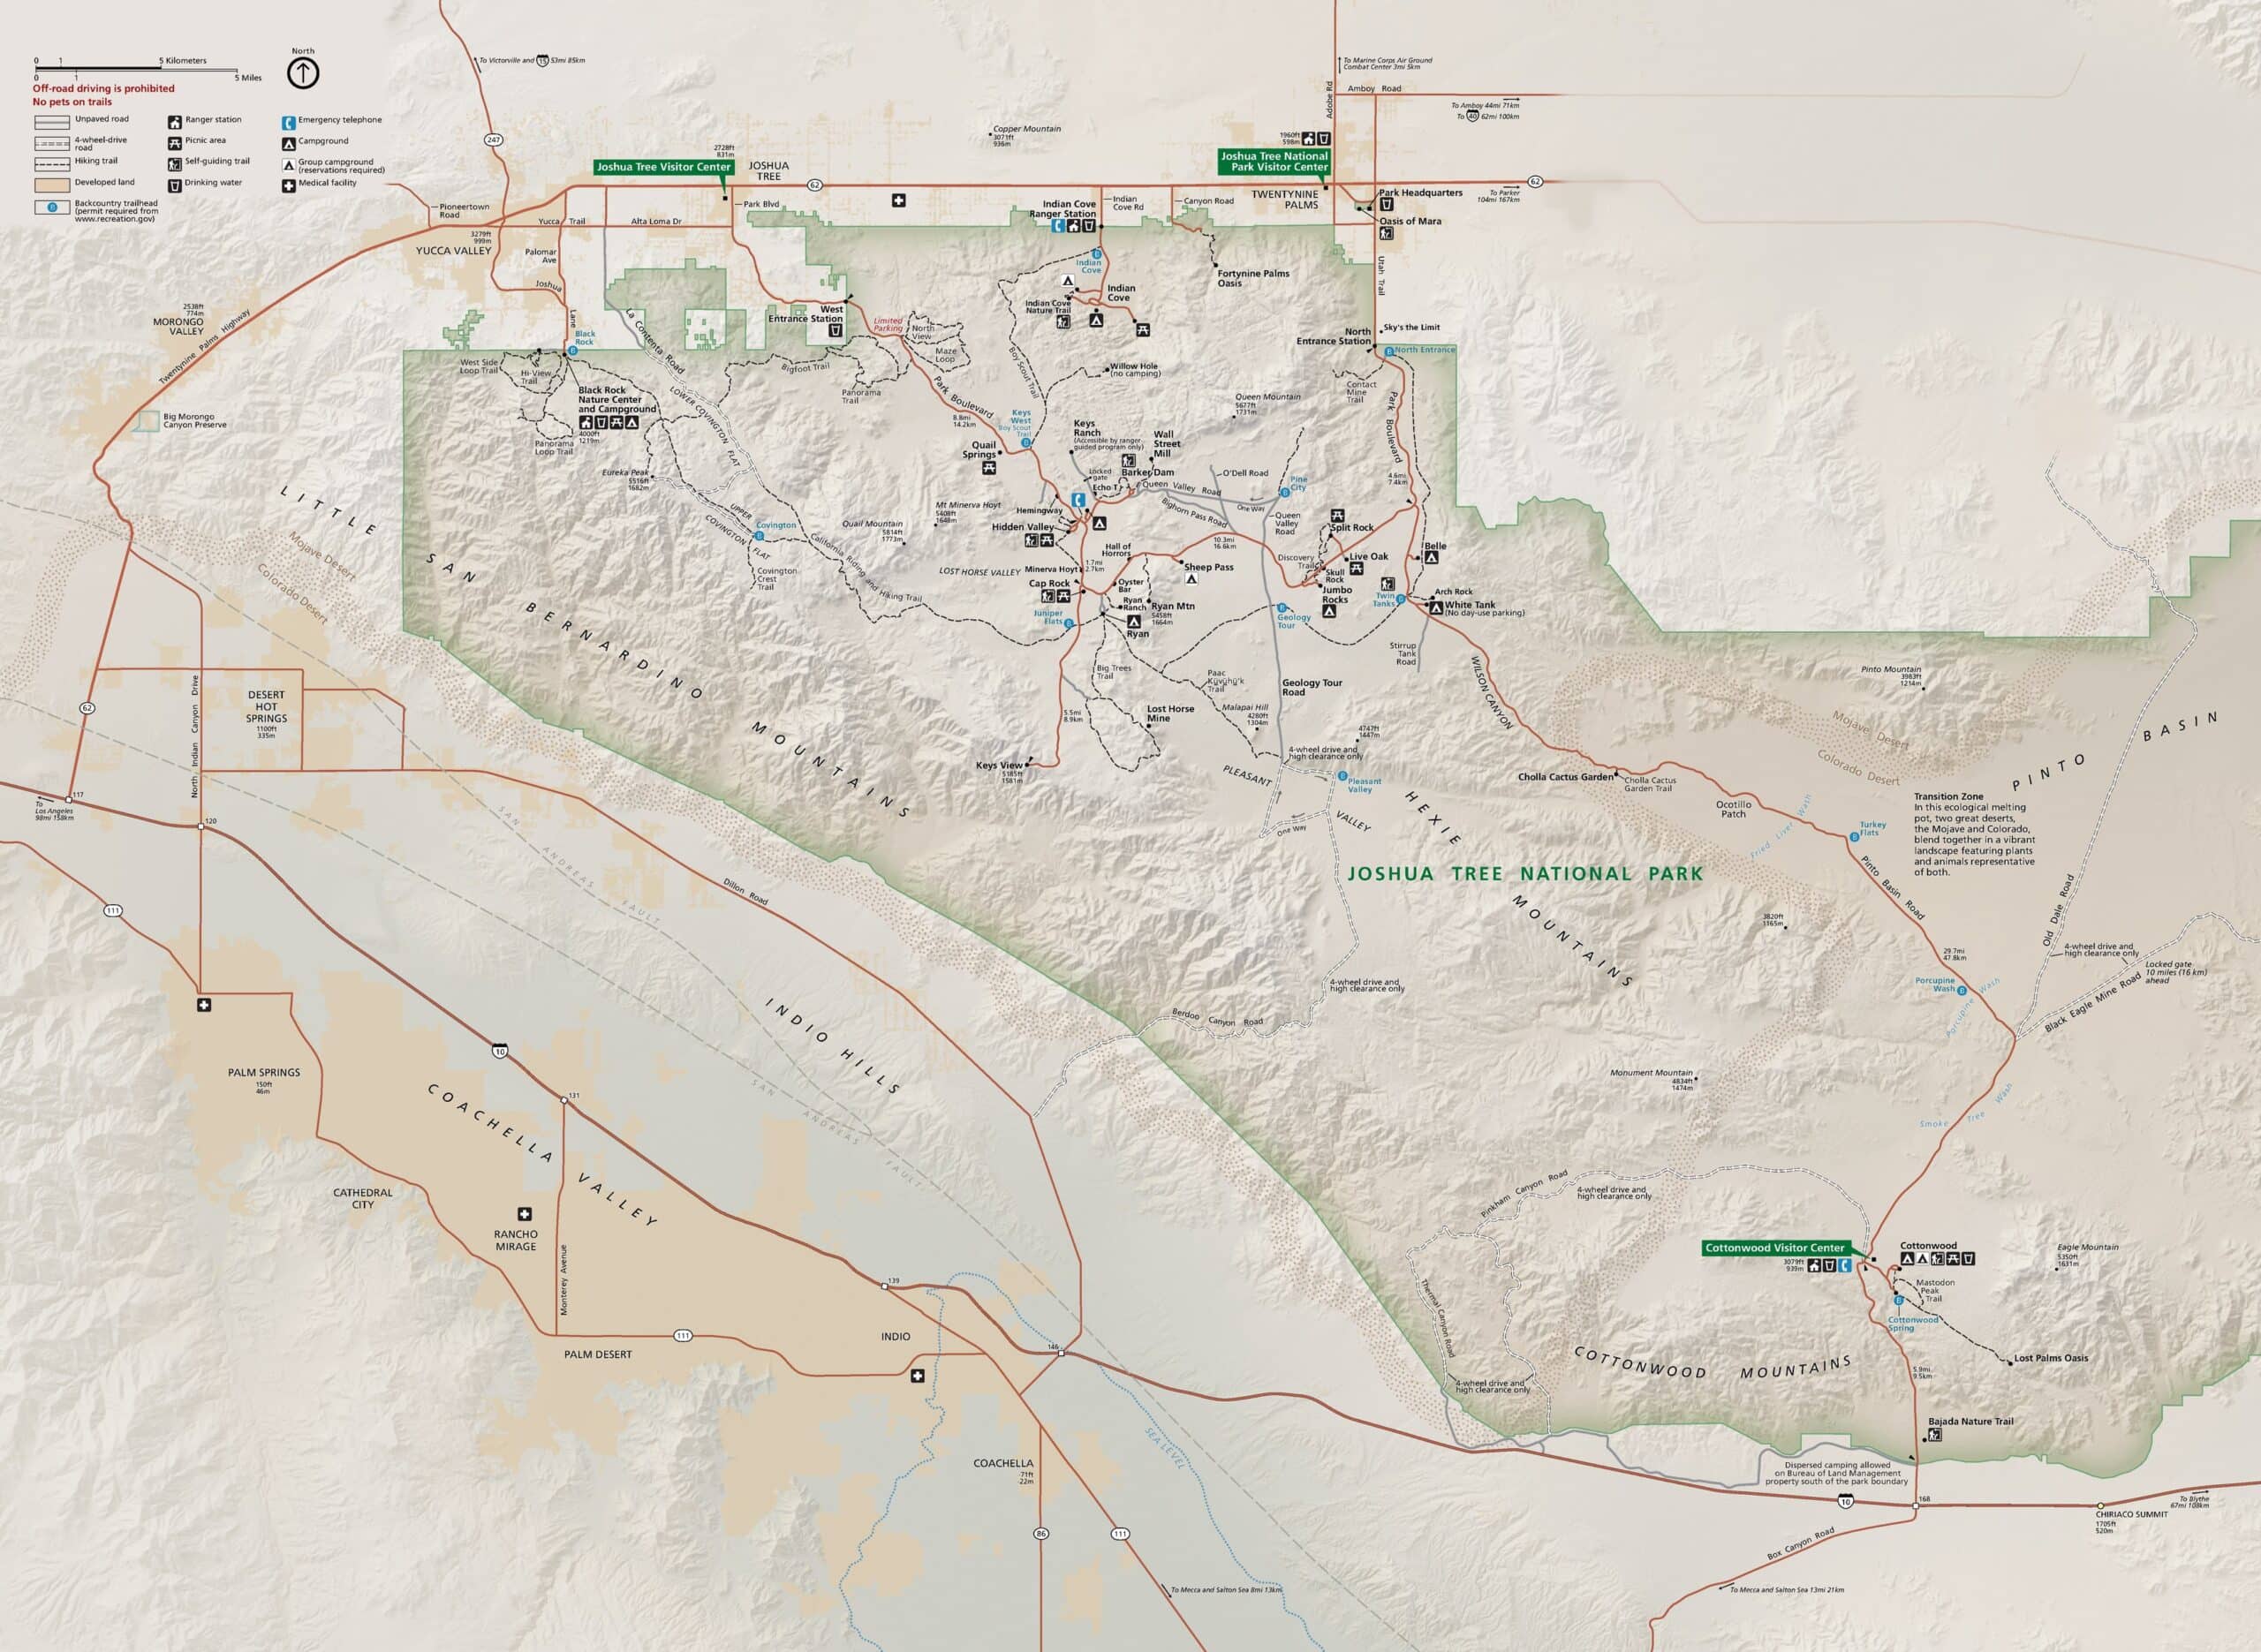 Alt text: A detailed map of Joshua Tree National Park, depicting roads, trails, campgrounds, visitor centers, and points of interest with a legend and topographical features. Surrounding areas like Coachella Valley, Palm Springs, and towns of Twentynine Palms and Joshua Tree are also shown.